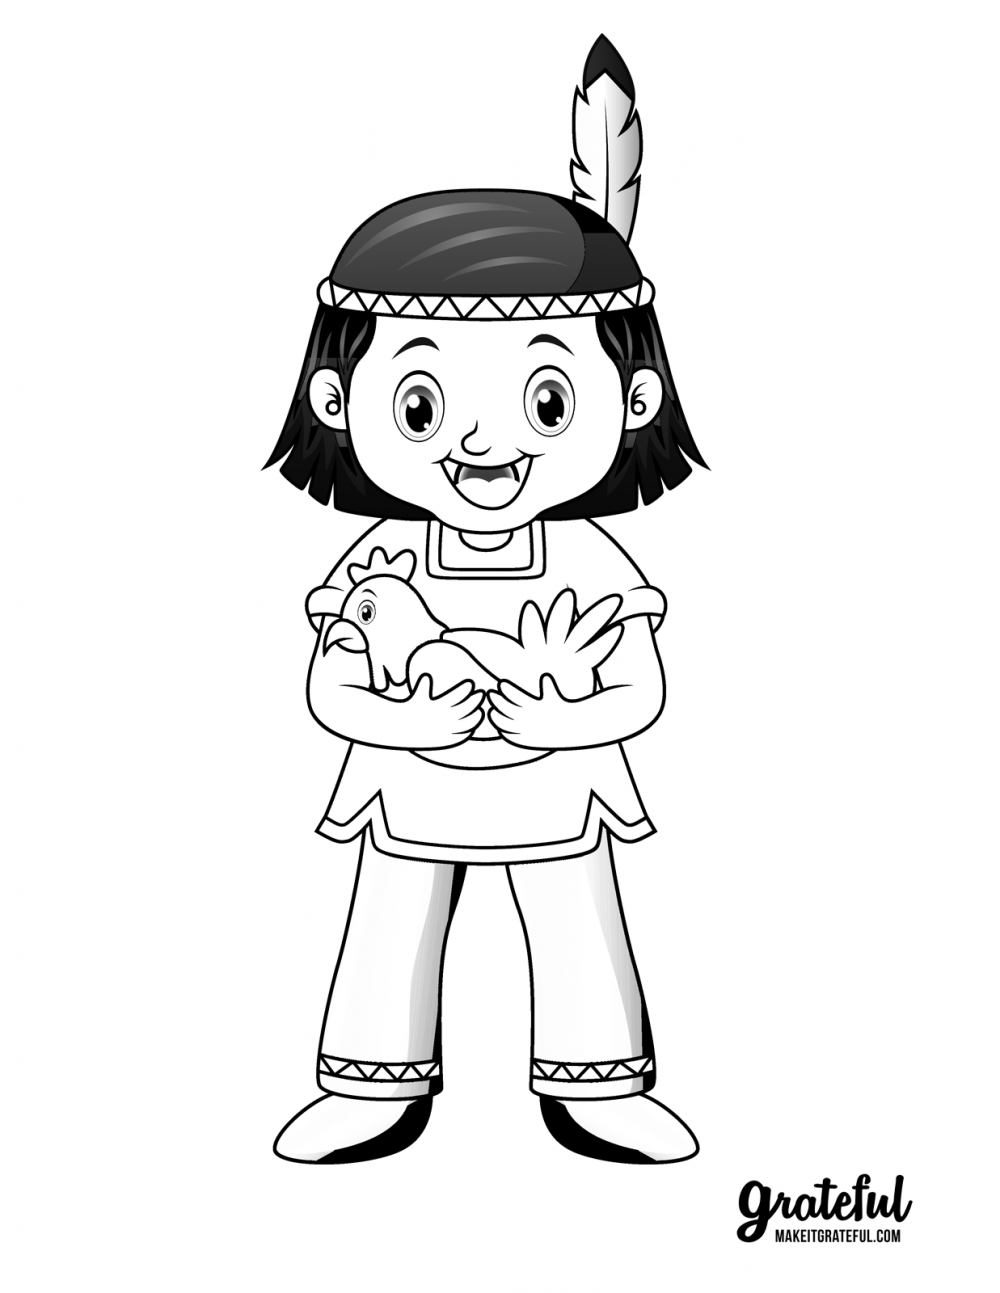 Native American boy - Thanksgiving coloring pages